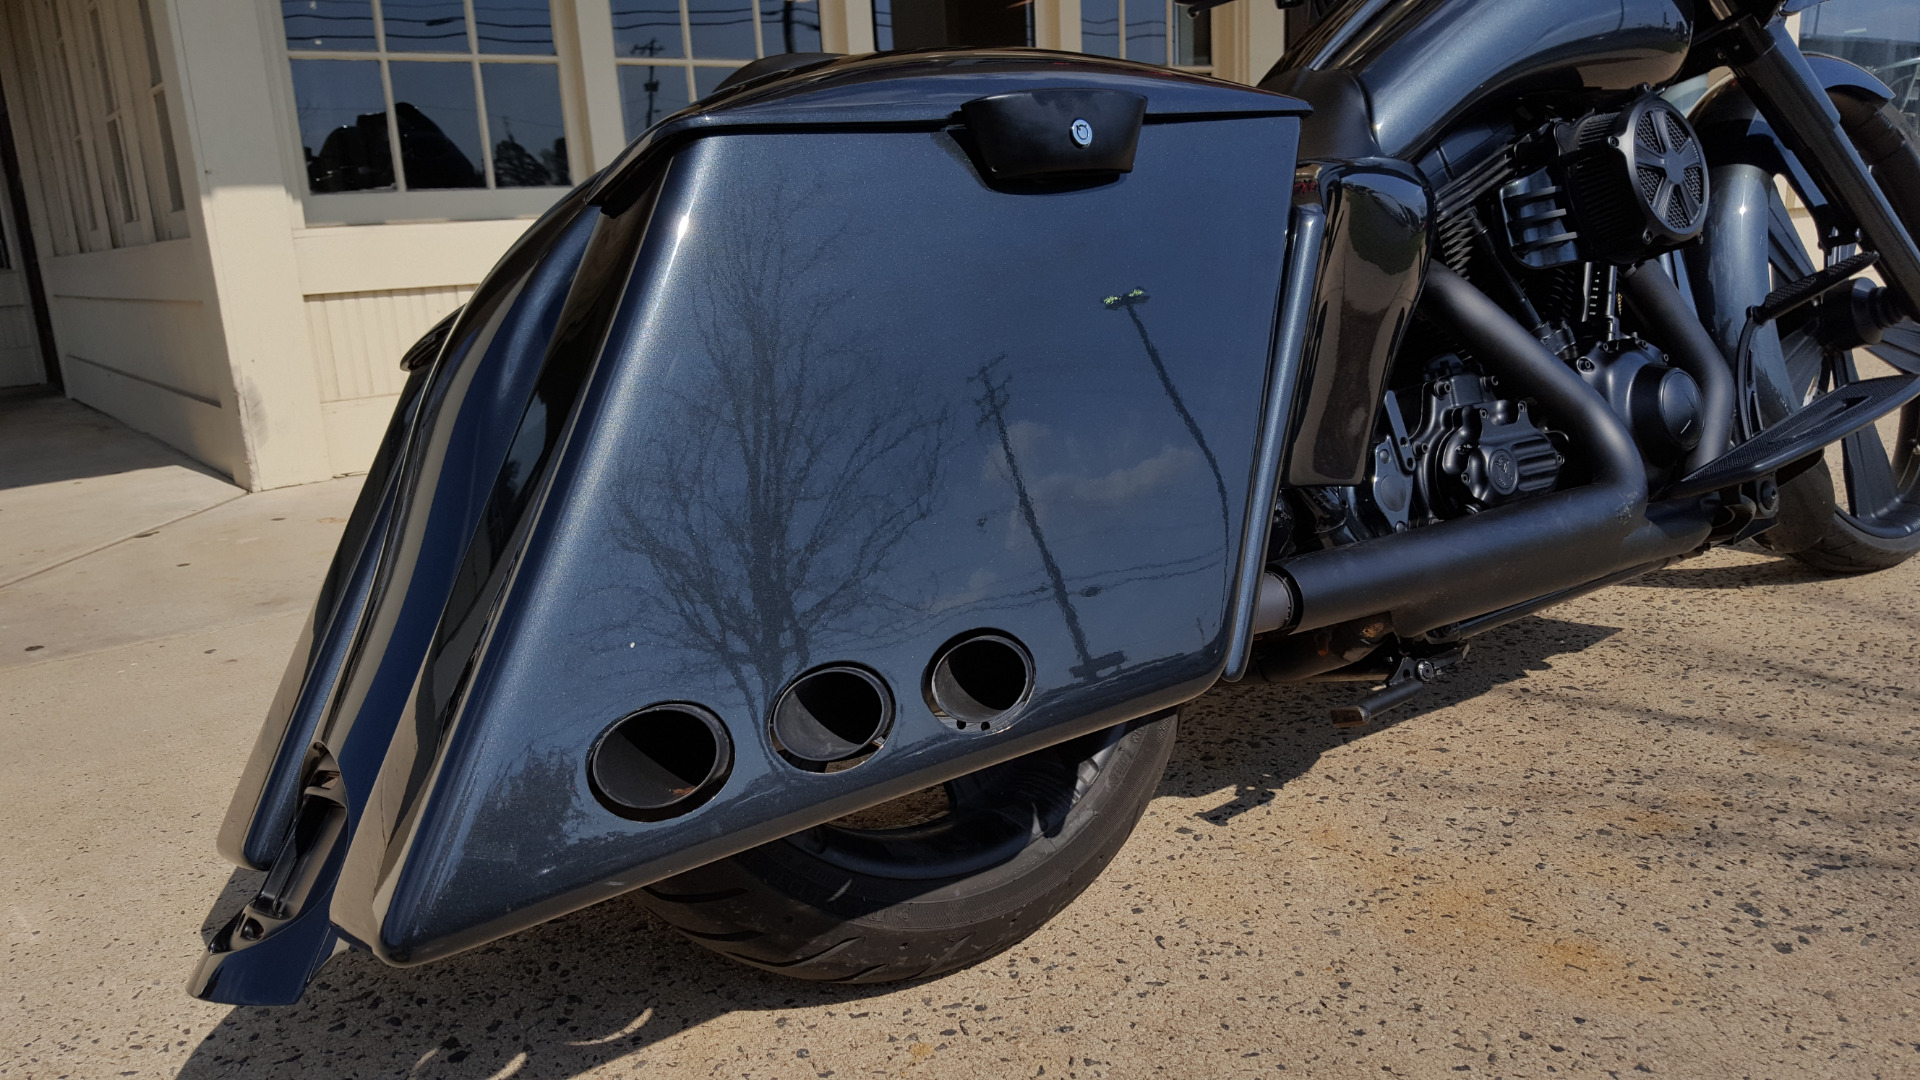 Bagger bags Custom Daymaker headlight pictures and review